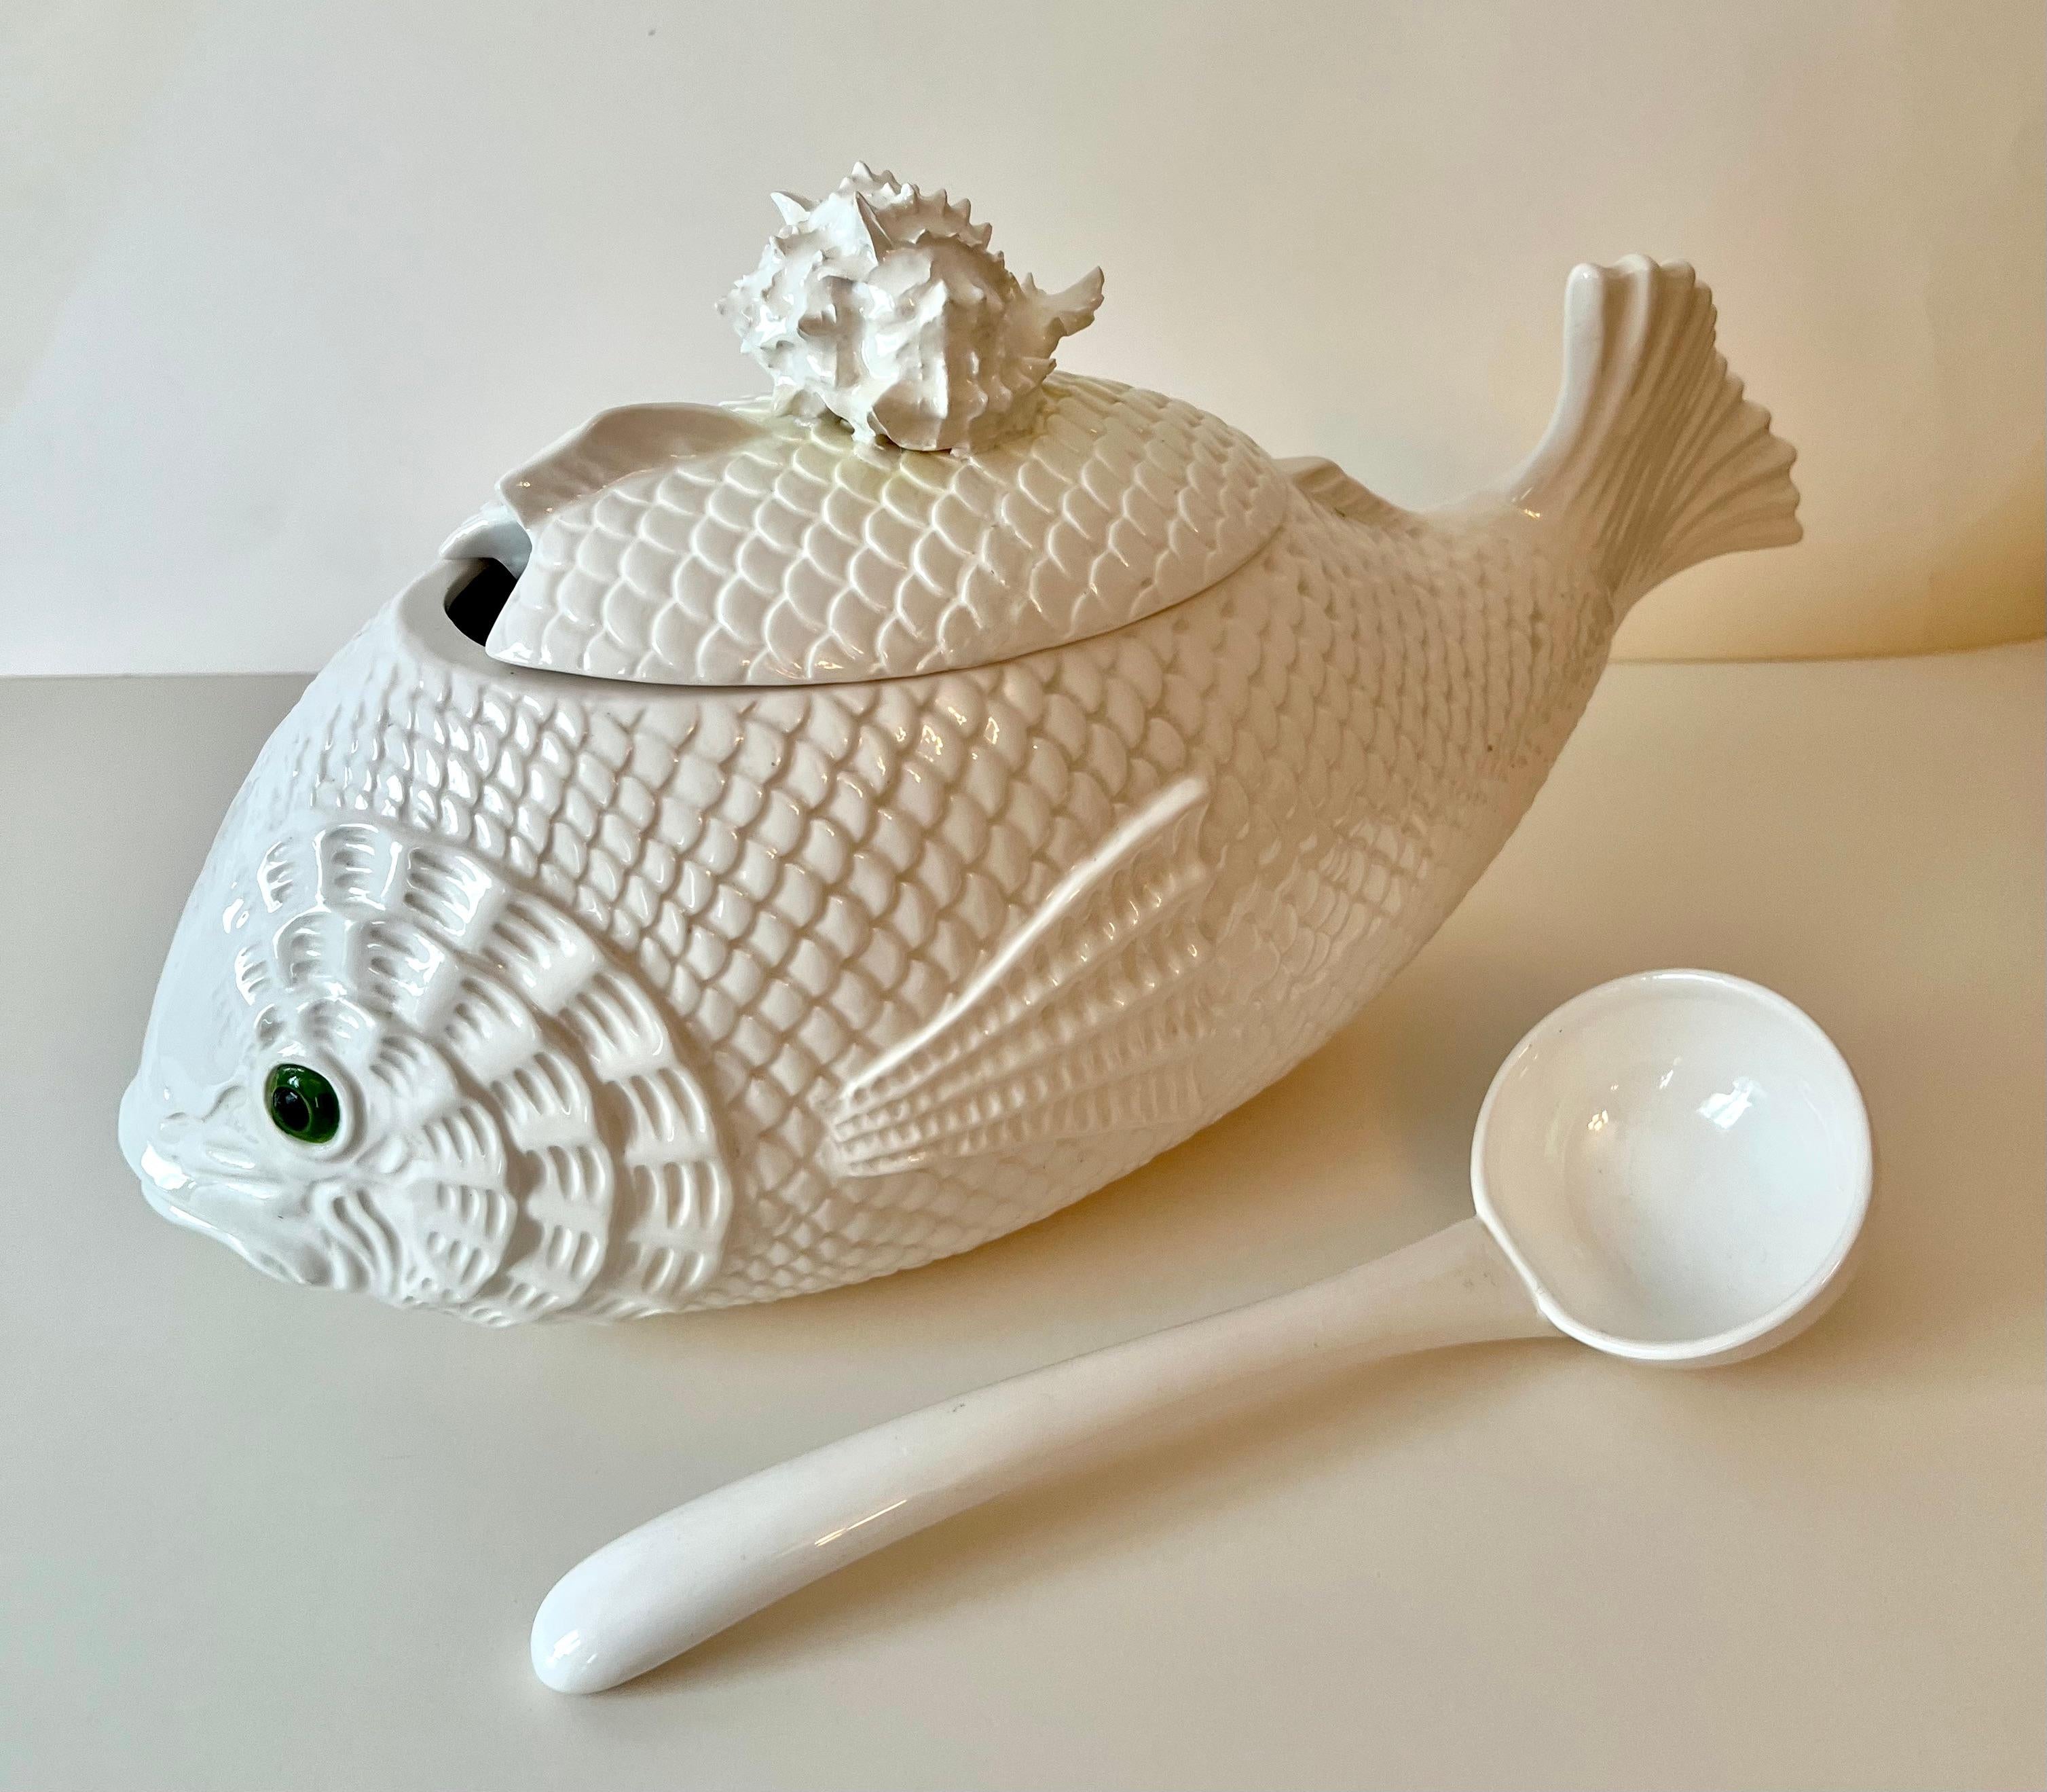 Ceramic Fitz and Floyd Fish Soup Tureen with Lid and Ladle For Sale